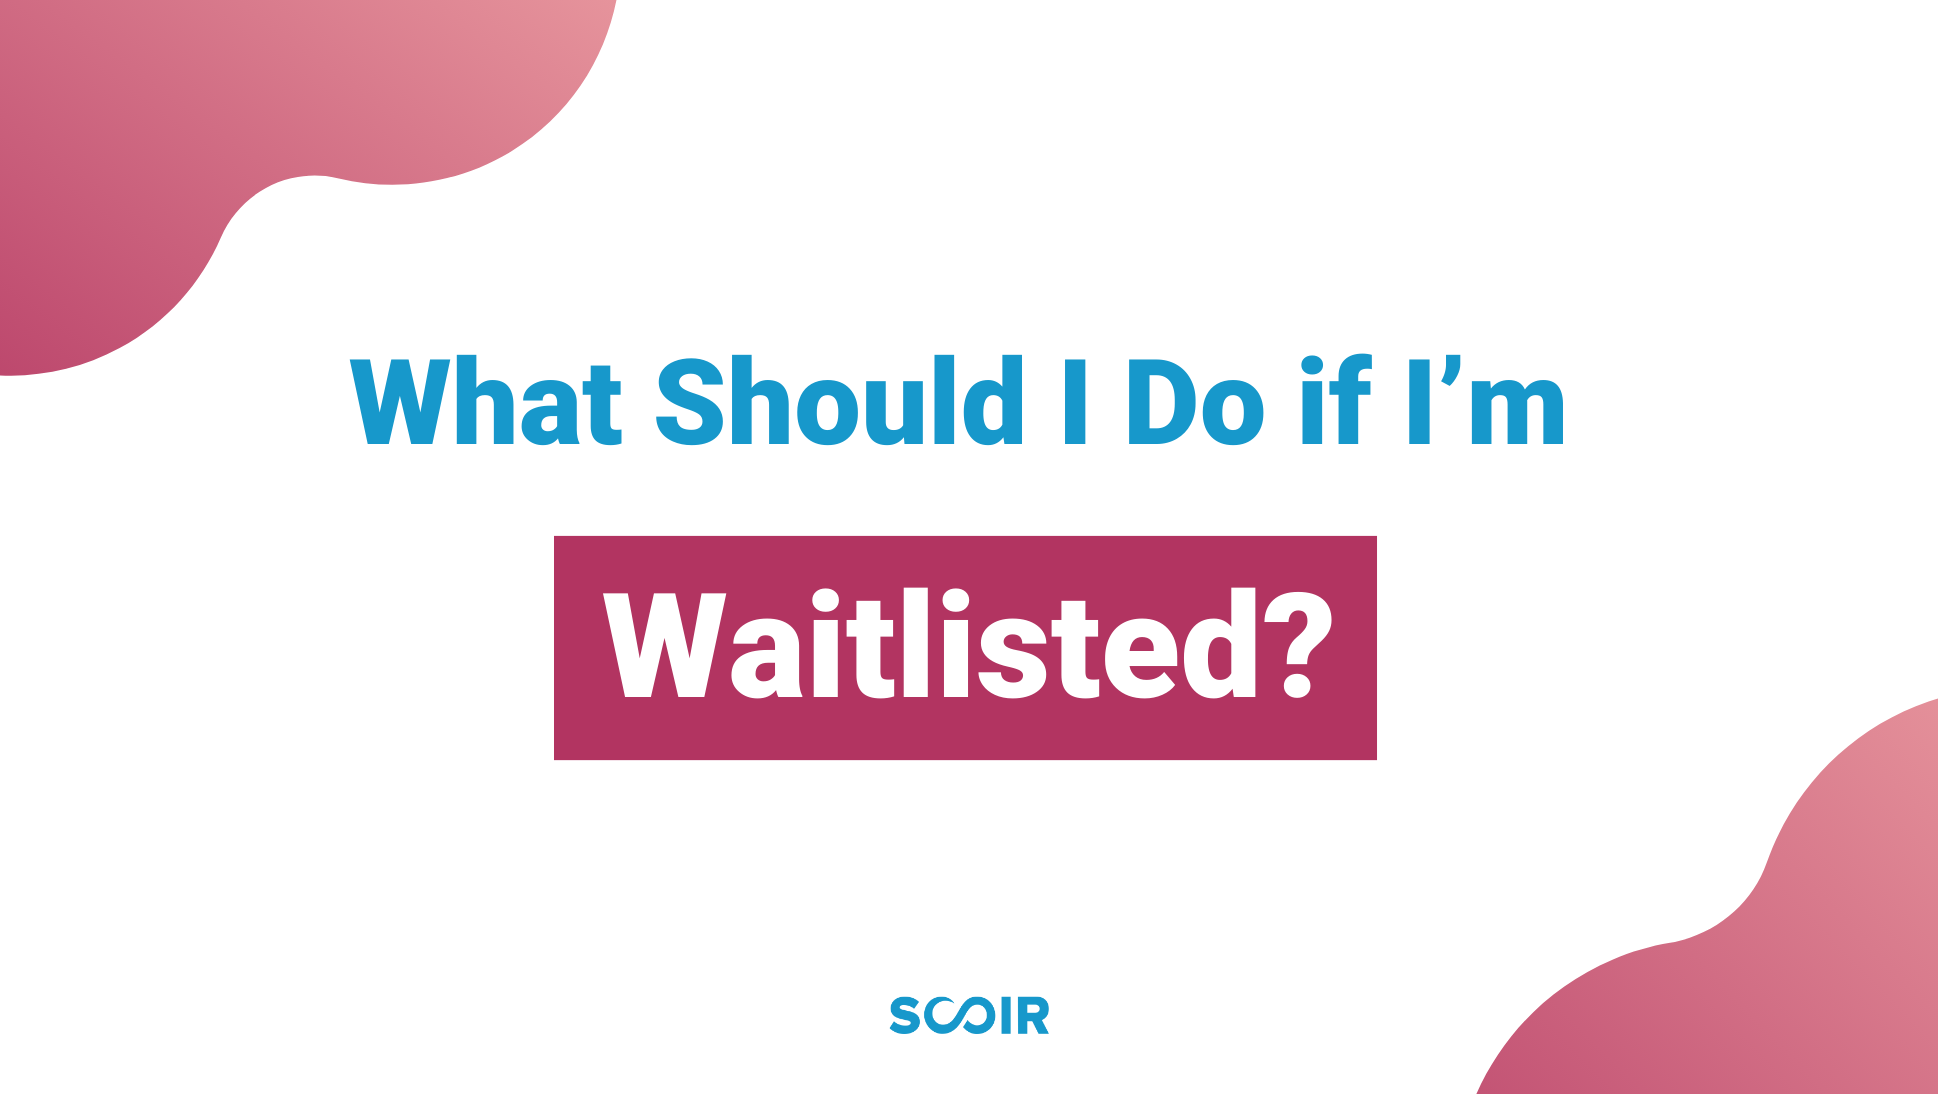 Deferred or Waitlisted: Understanding These Terms and Planning Your Next Steps